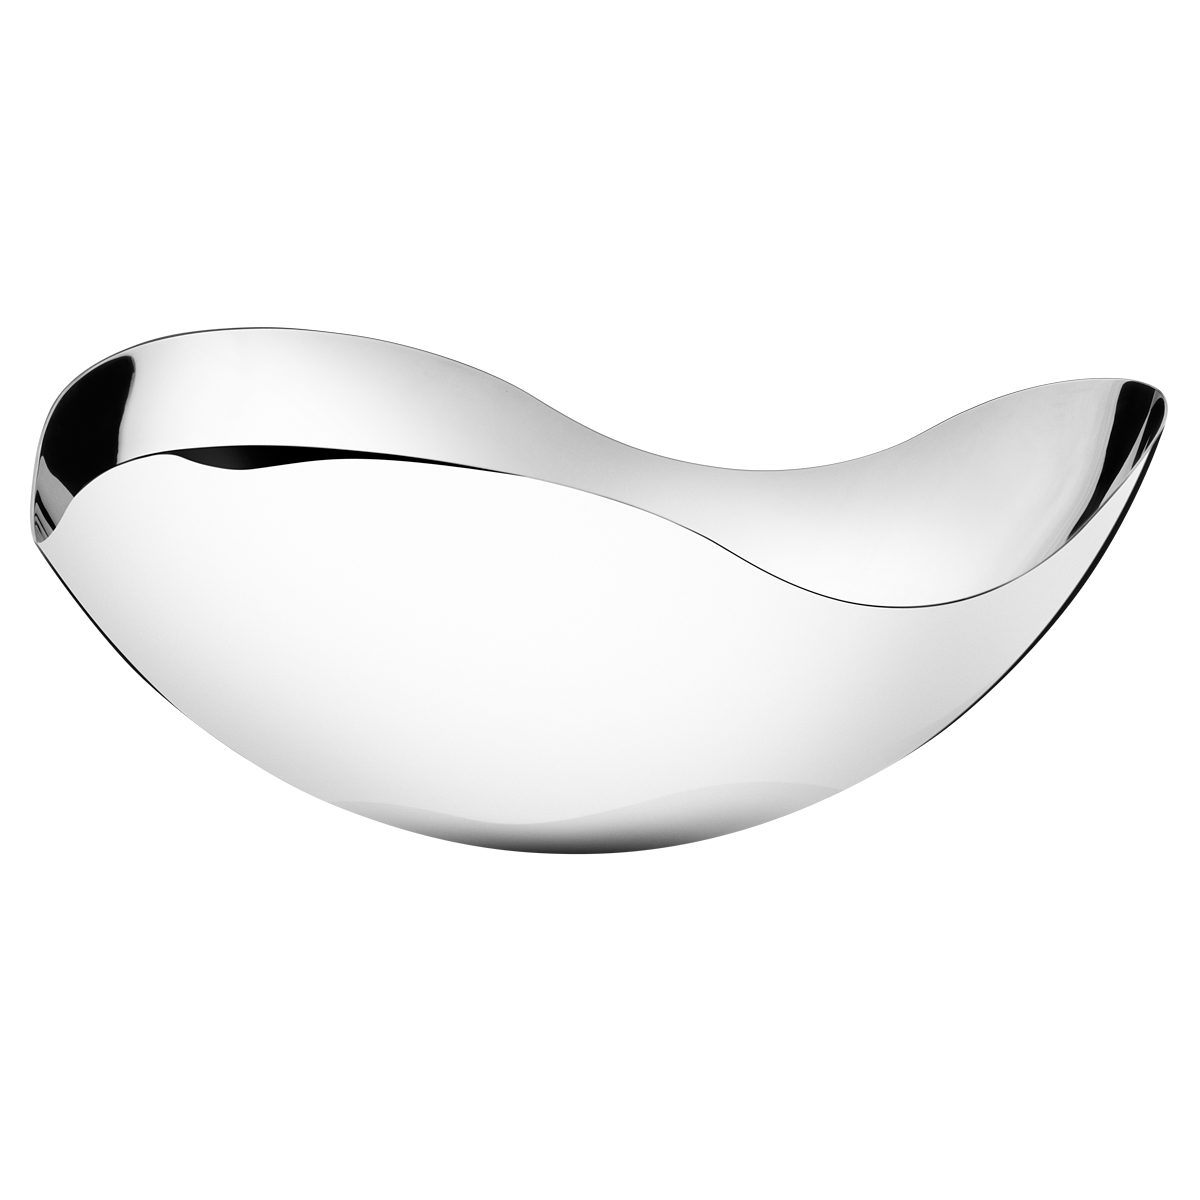 Bloom Large Polished Stainless Steel Mirror Bowl Details about   Georg Jensen 3586282 